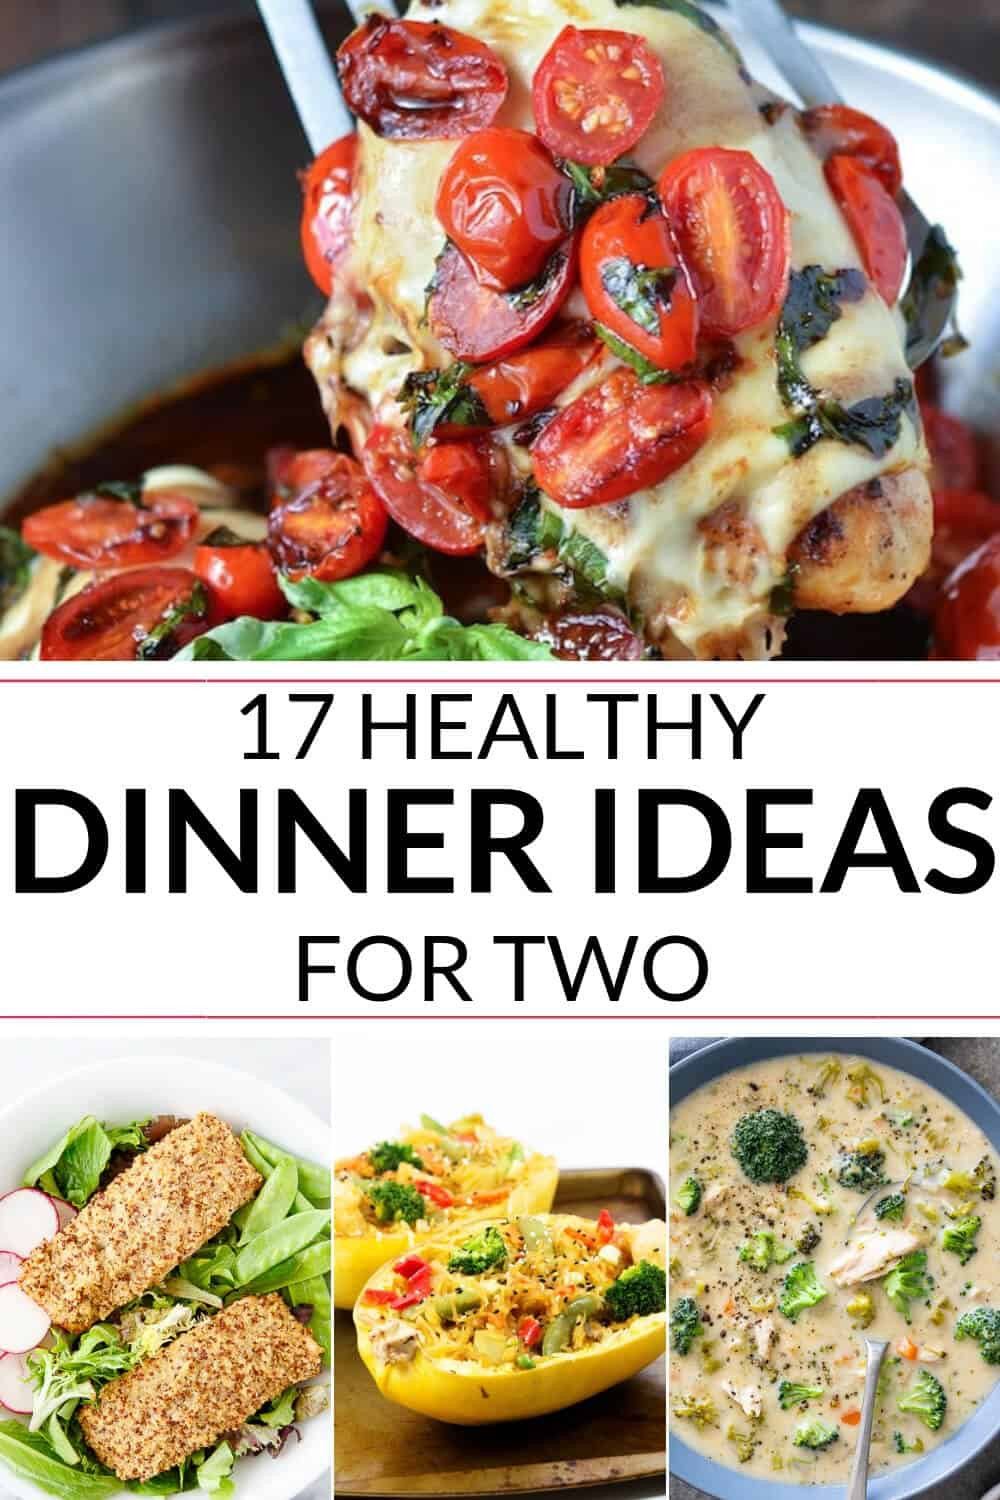 15 Recipes for Great Healthy Dinner for Two